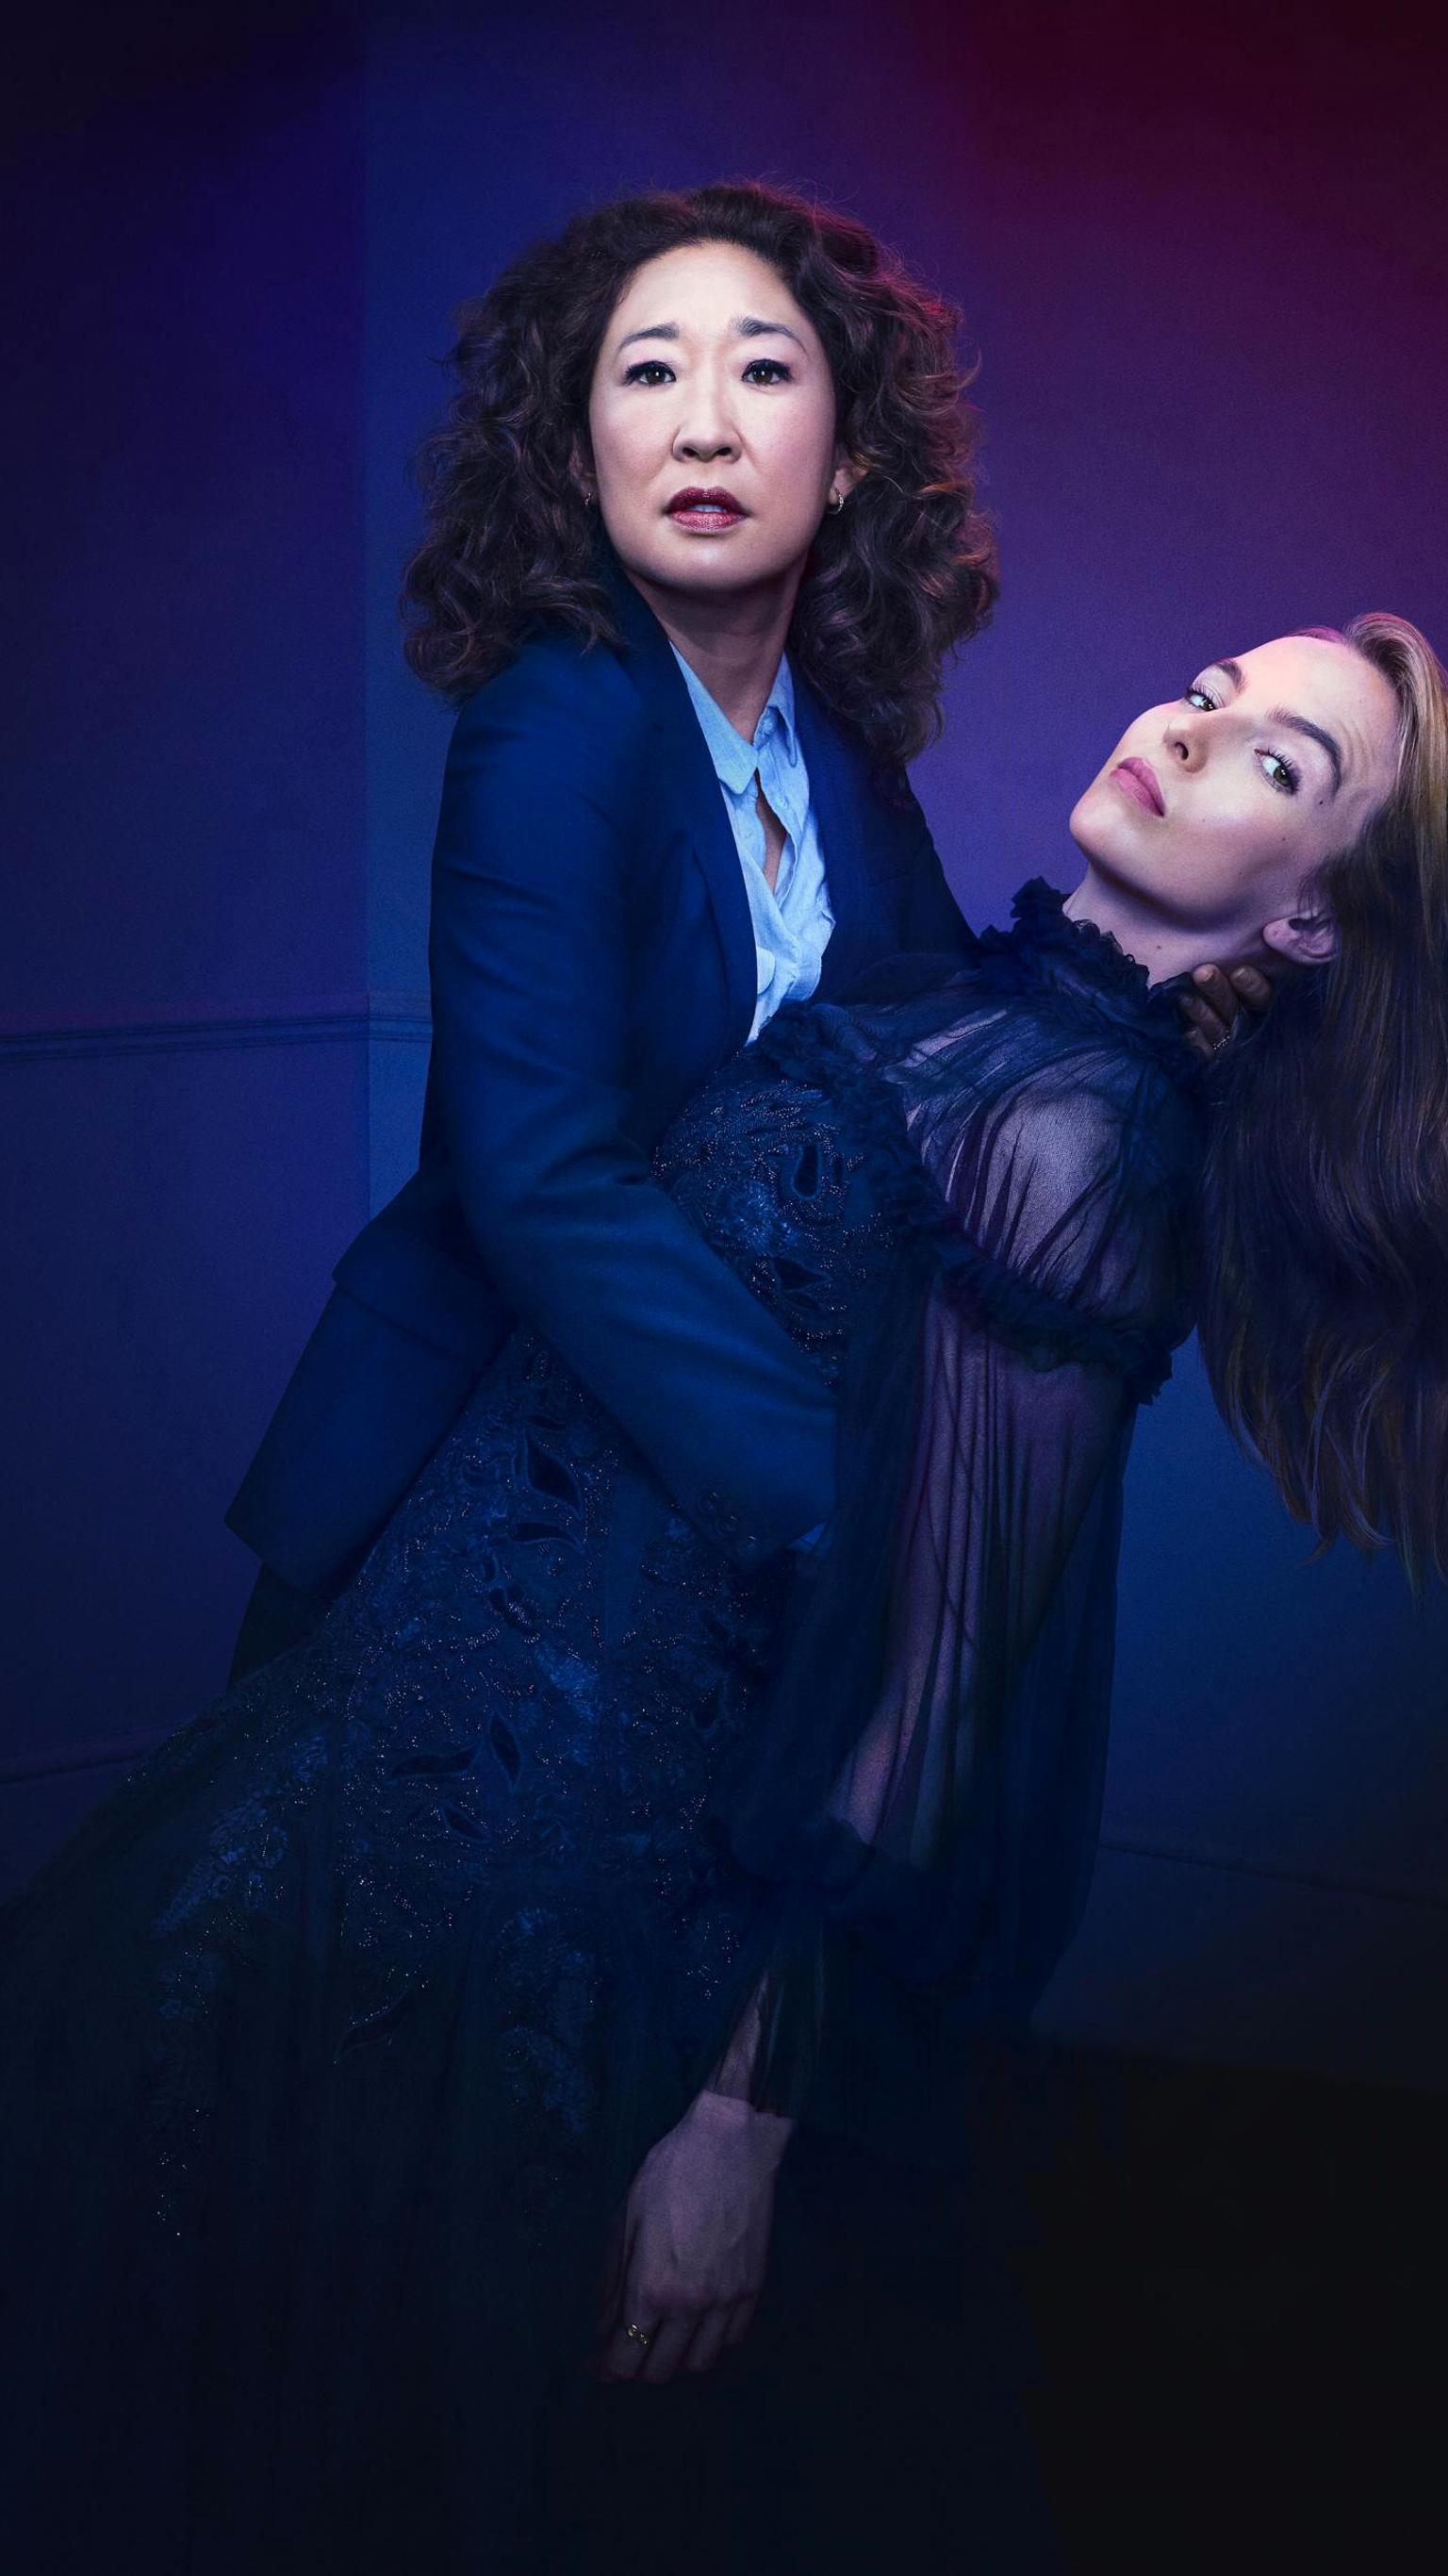 Killing Eve Wallpapers